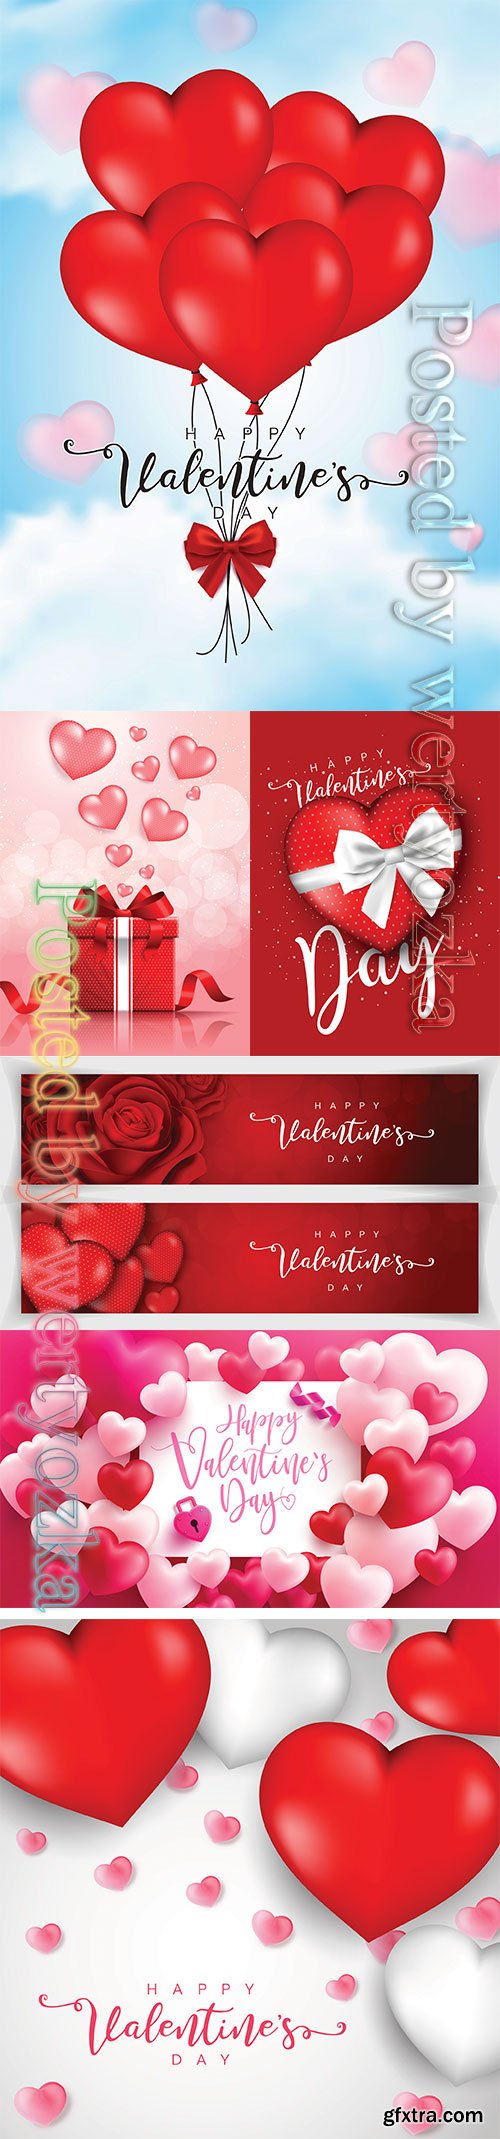 Valentine's Day poster or banner, background for love and Valentine's day concept